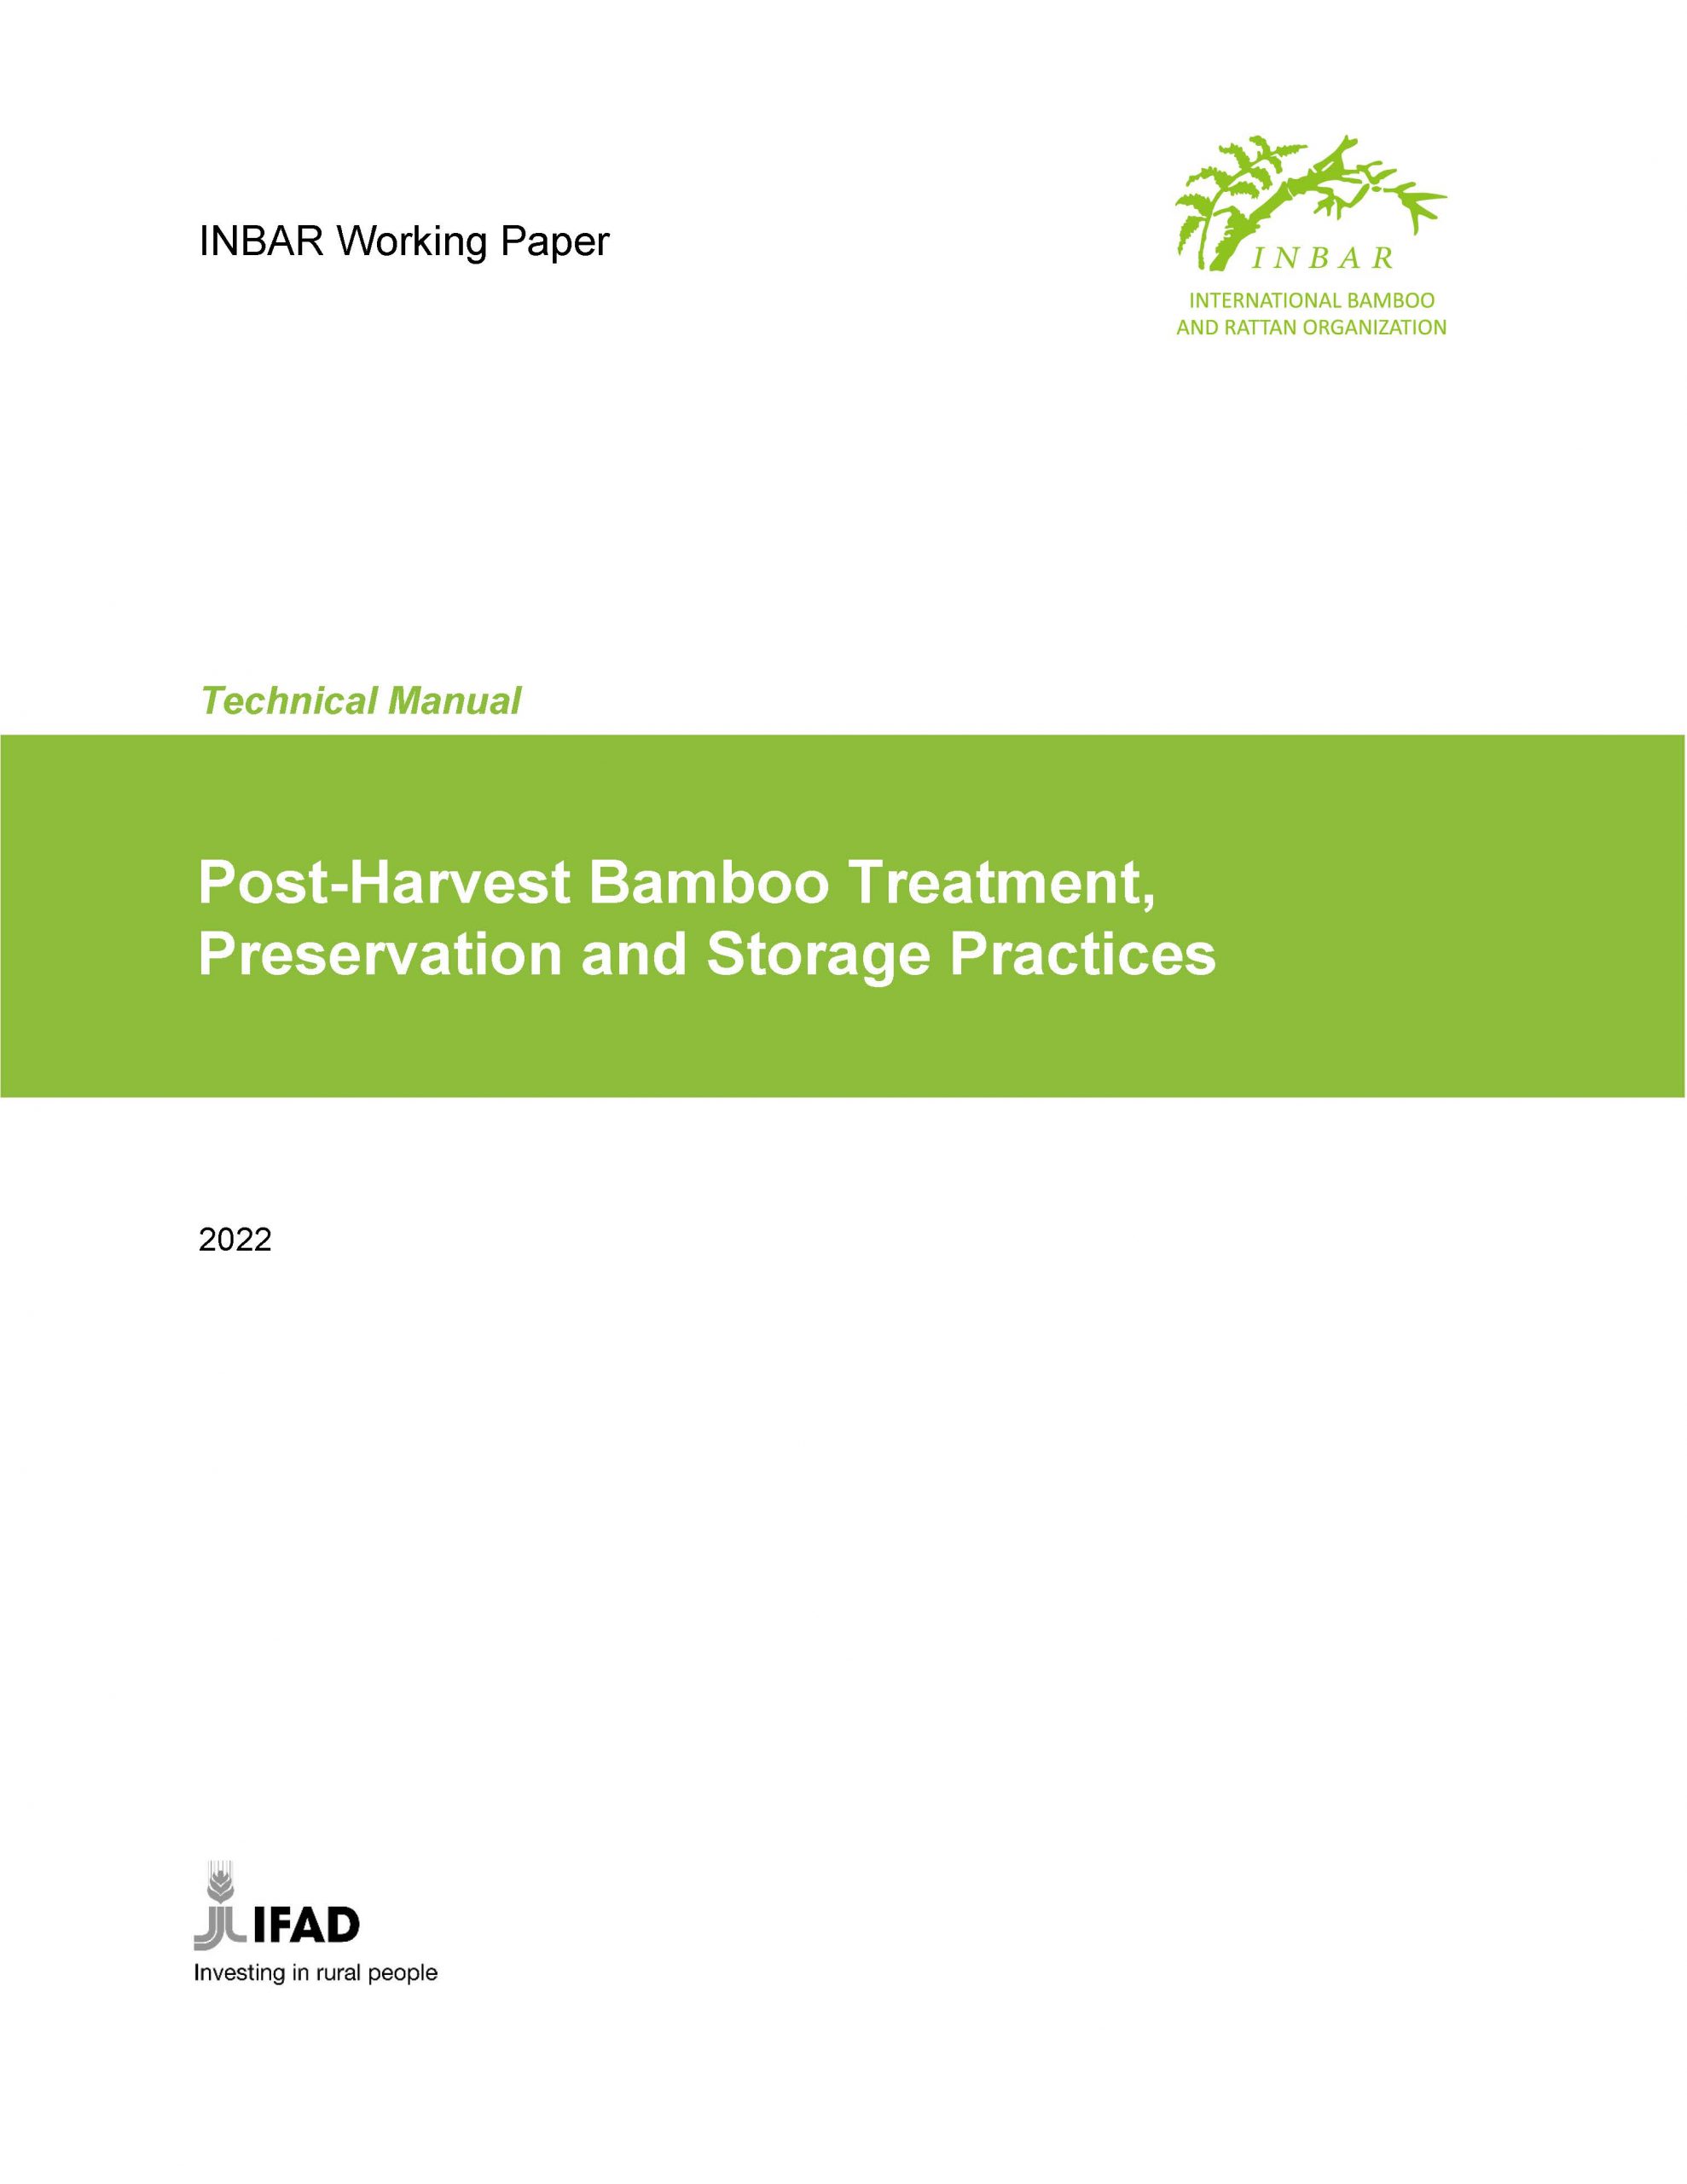 Post-Harvest Bamboo Treatment, Preservation and Storage Practices